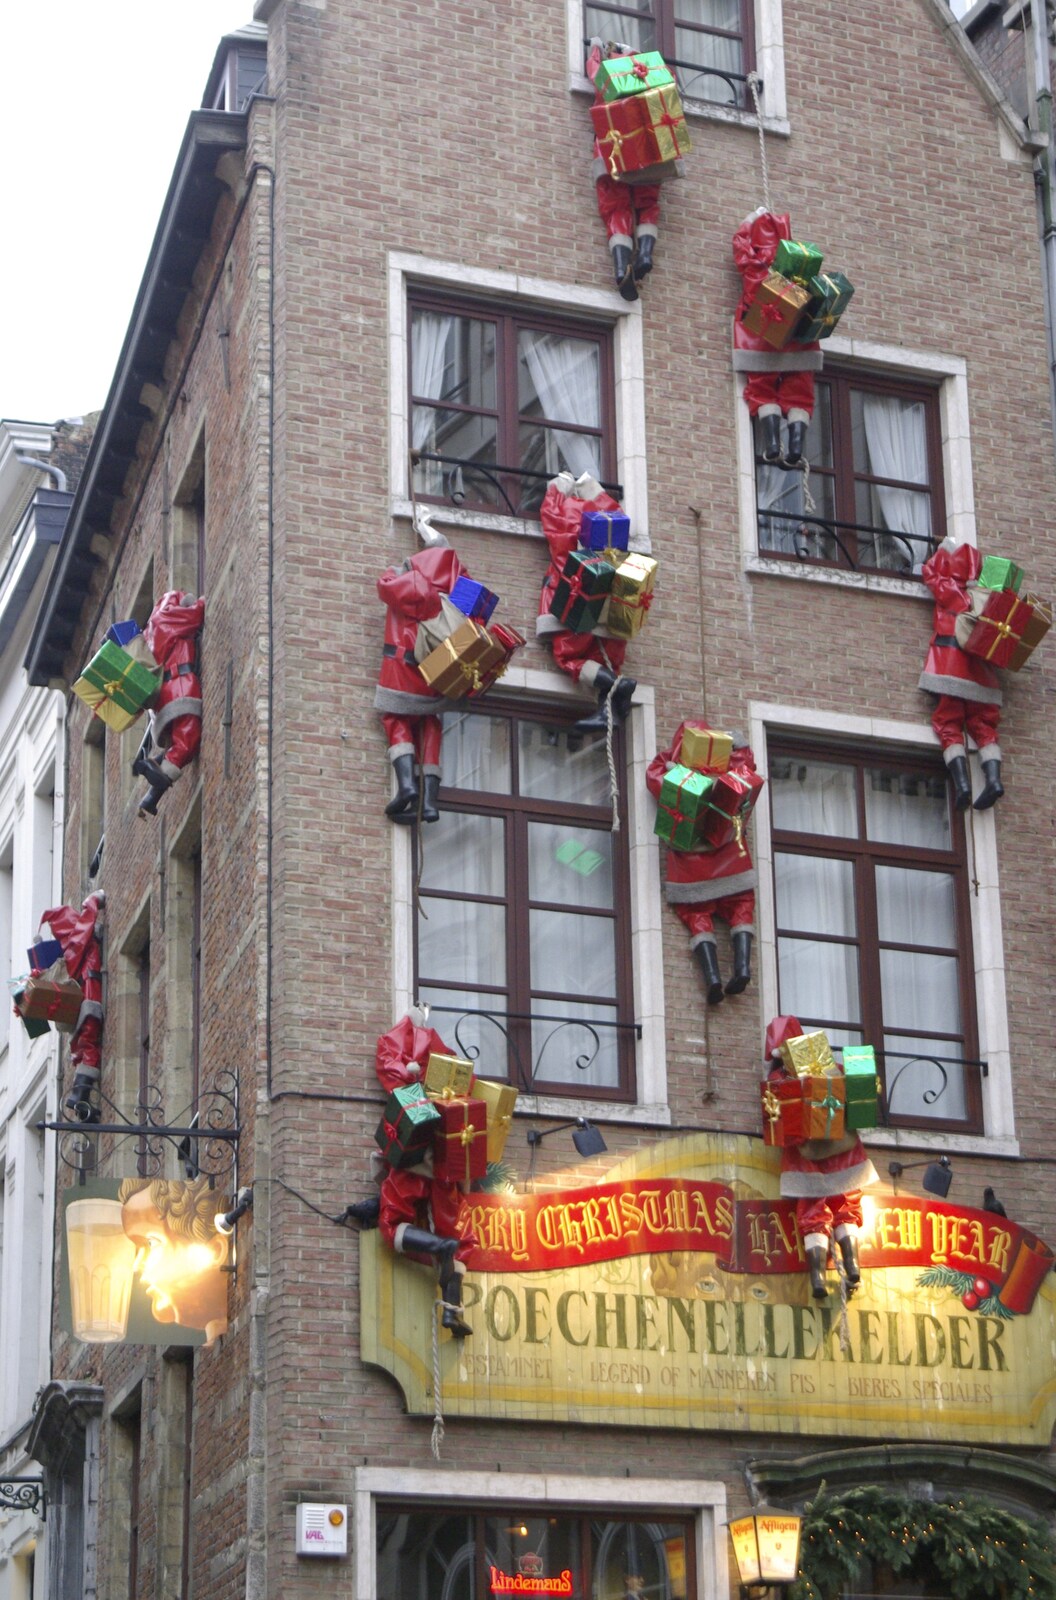 Near the Manneken Pis, Santas climb the walls from The Christmas Markets of Brussels, Belgium - 1st January 2007